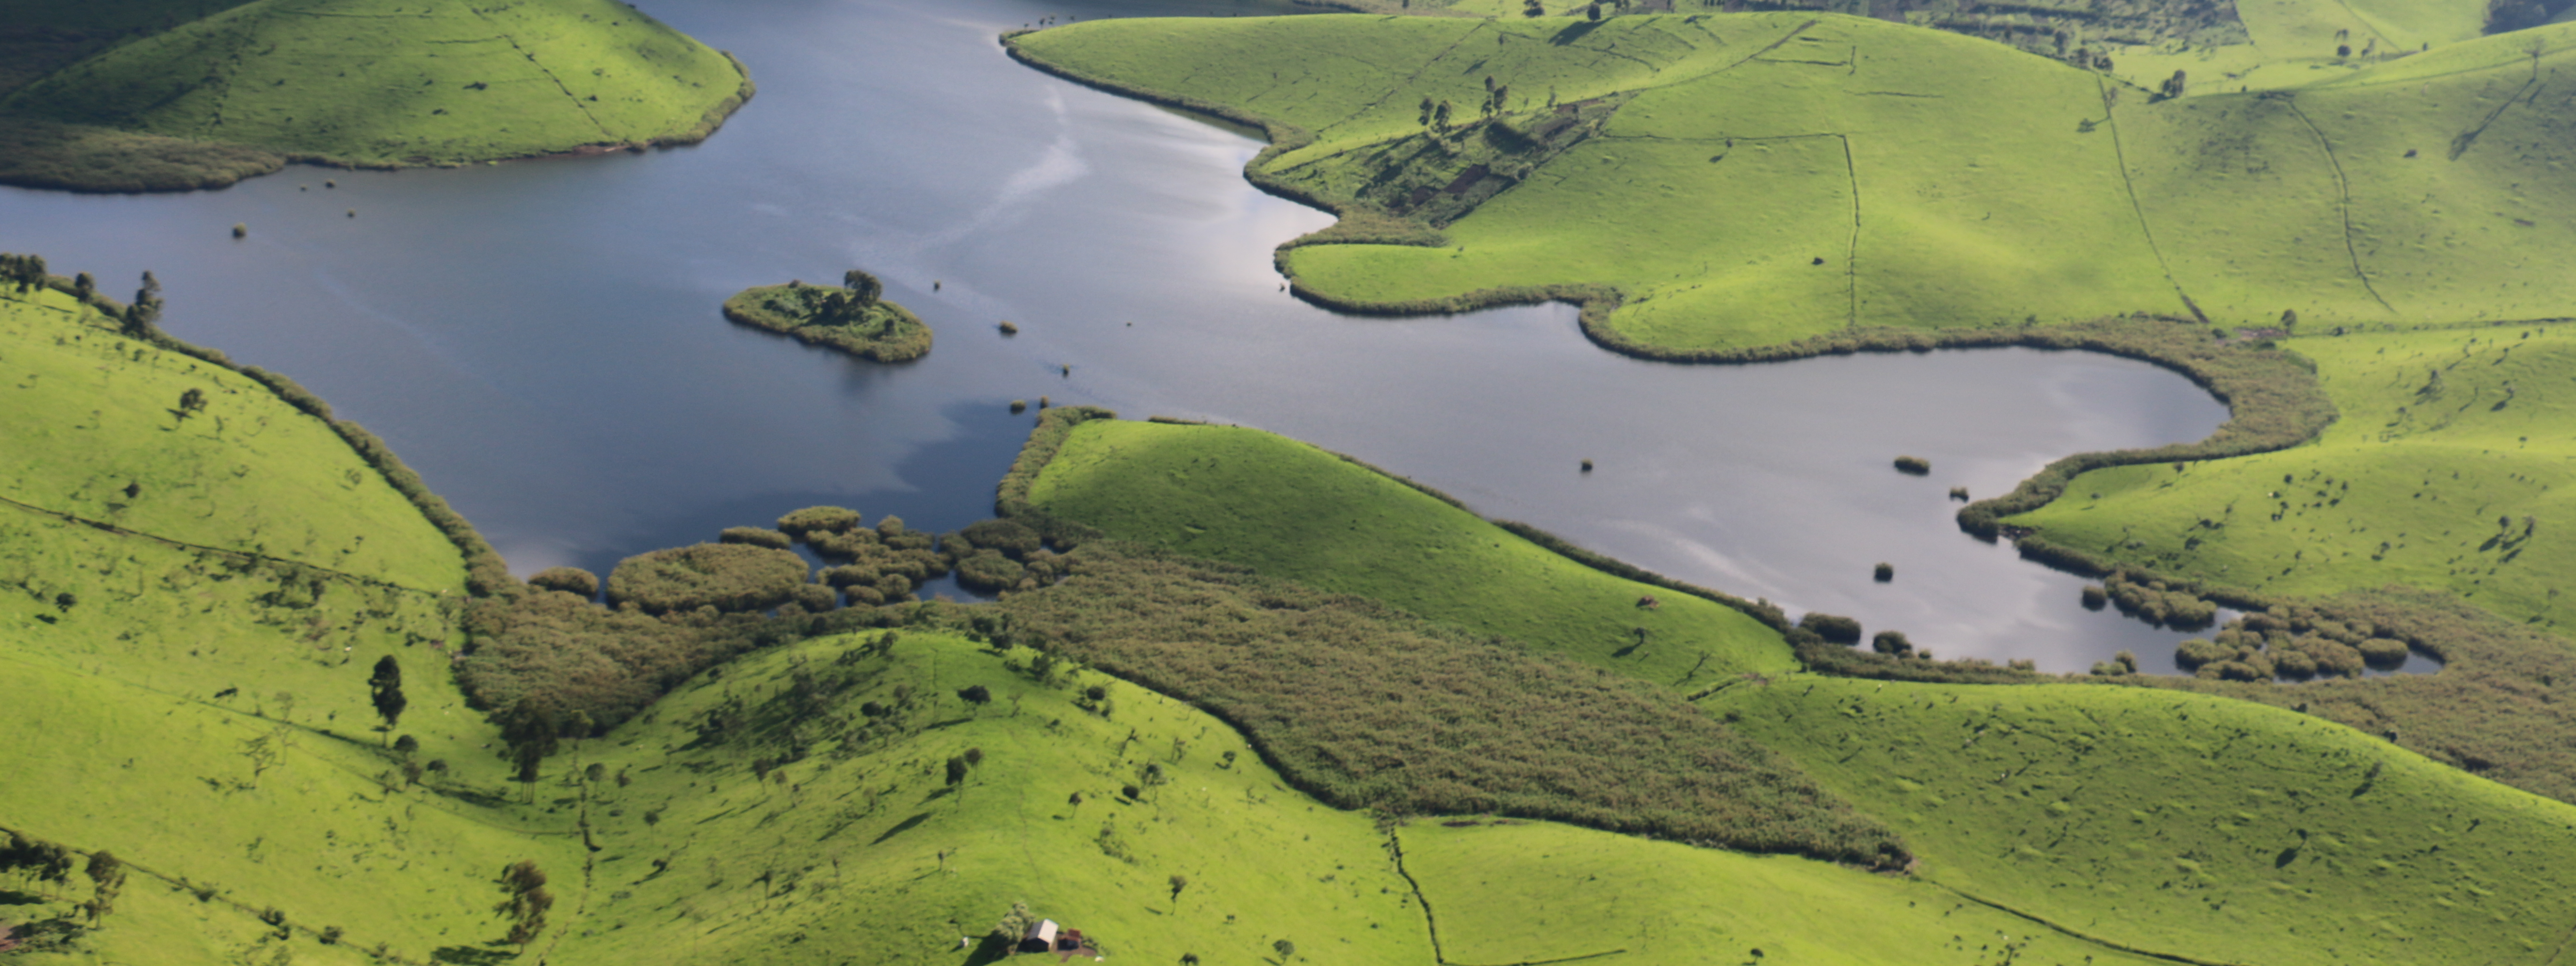 A hilly and green landscape with a lake